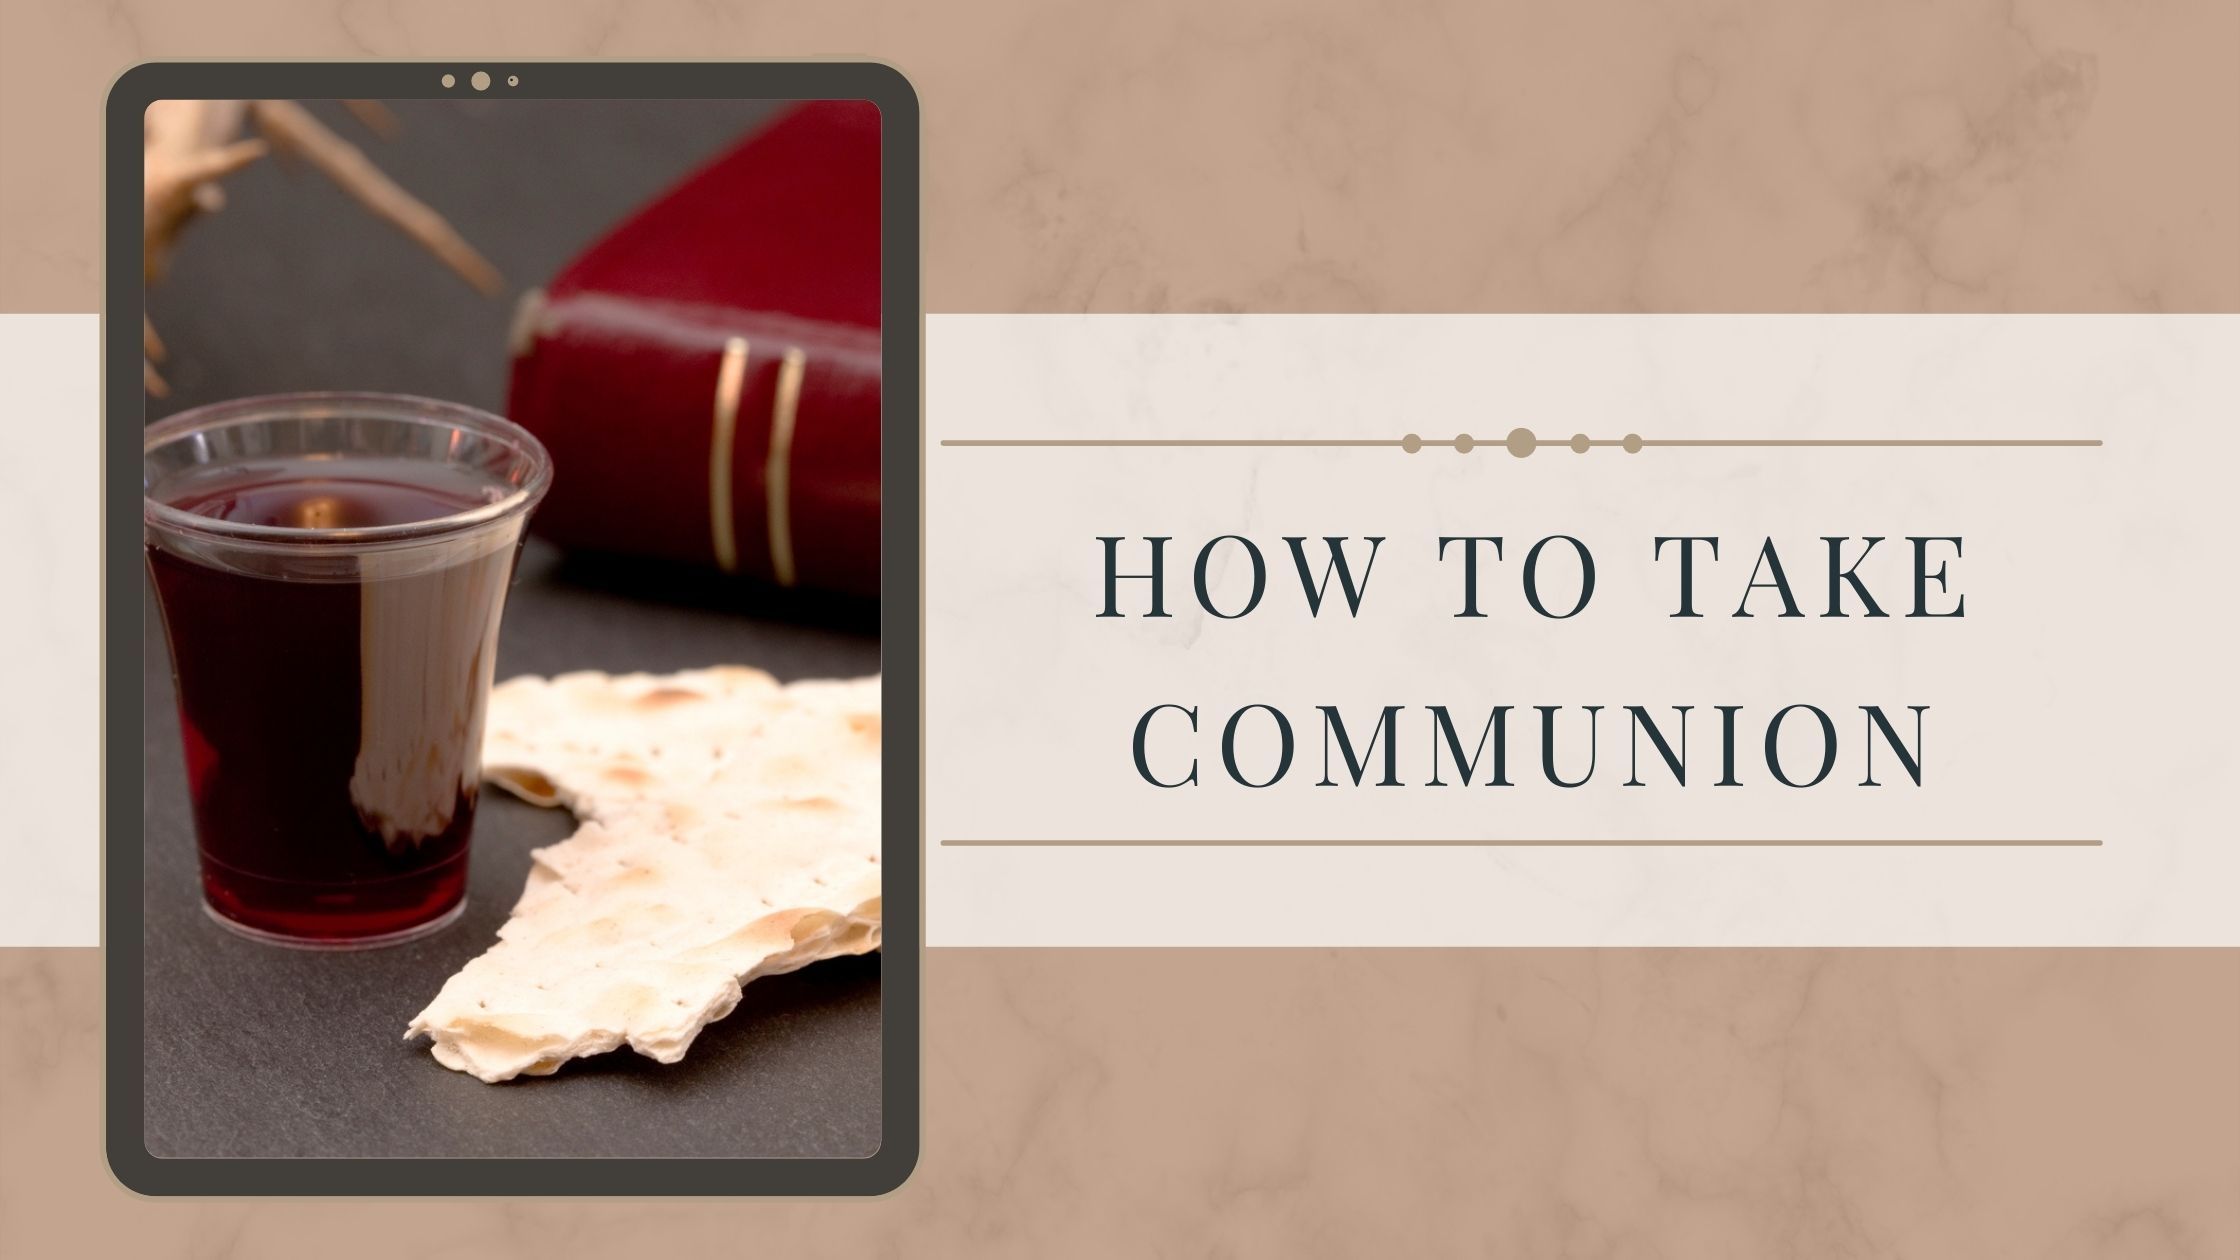 How to take communion